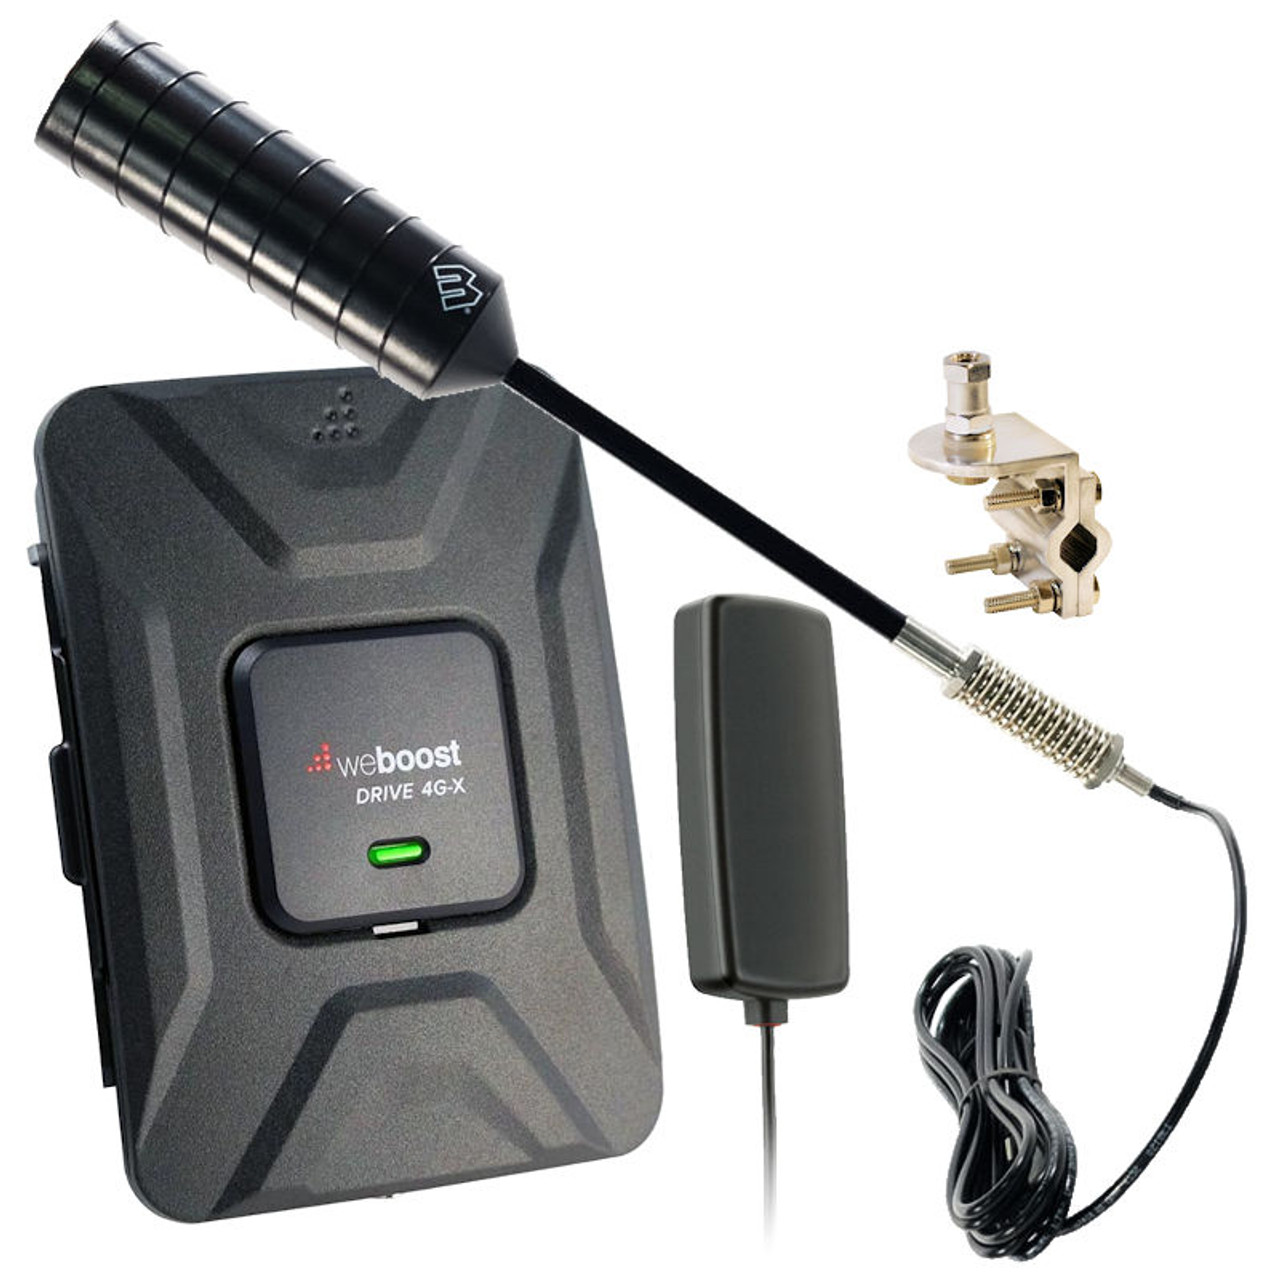 Cell Phone Signal Booster : Best Cell Phone Signal Booster For RV or Camper Van / That's why cell phone signal boosters are such an essential product.